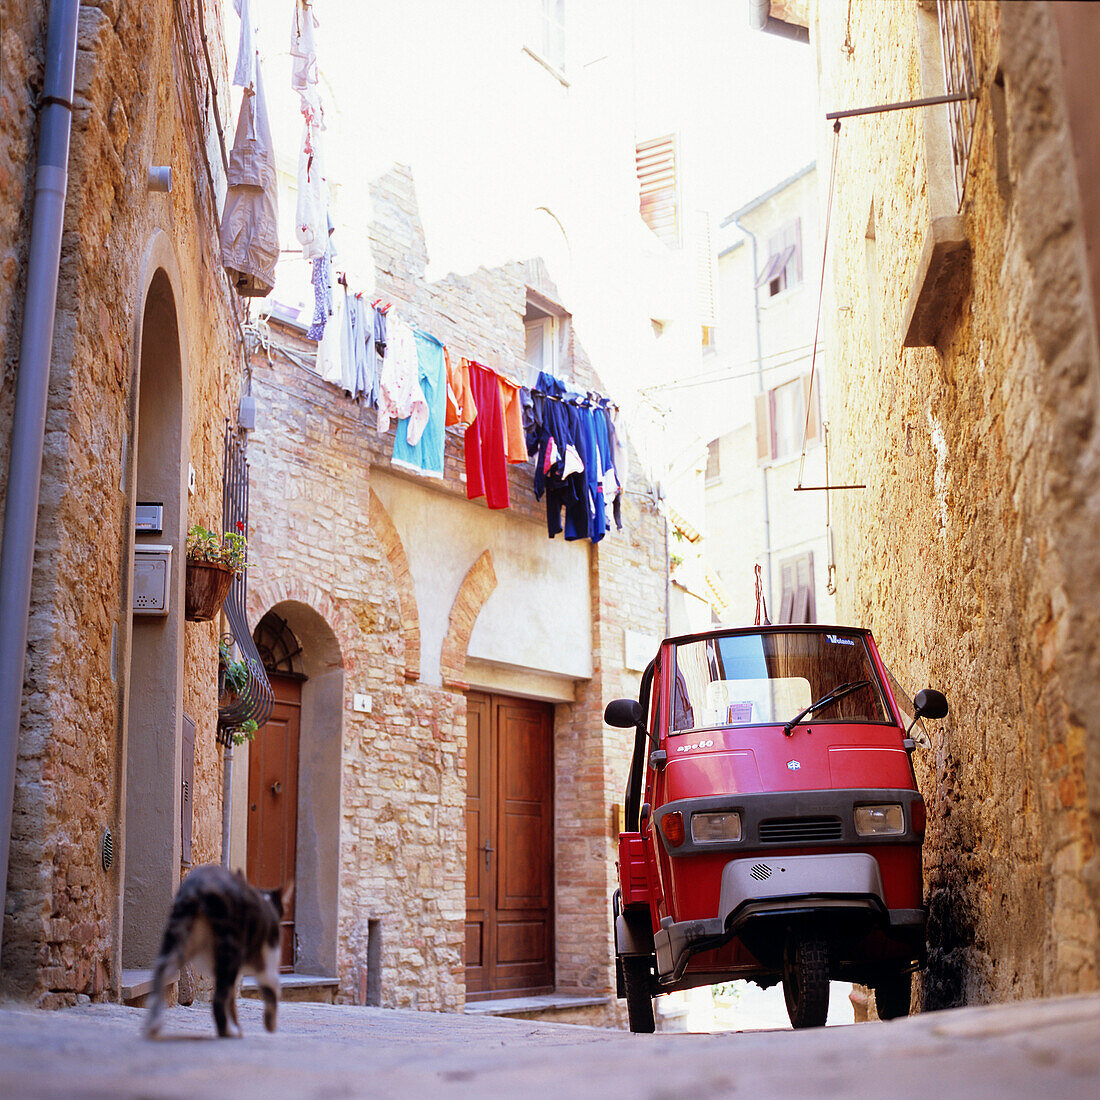 Small car standing in a narrow alley, Montepulciano, Tuscany, Italy